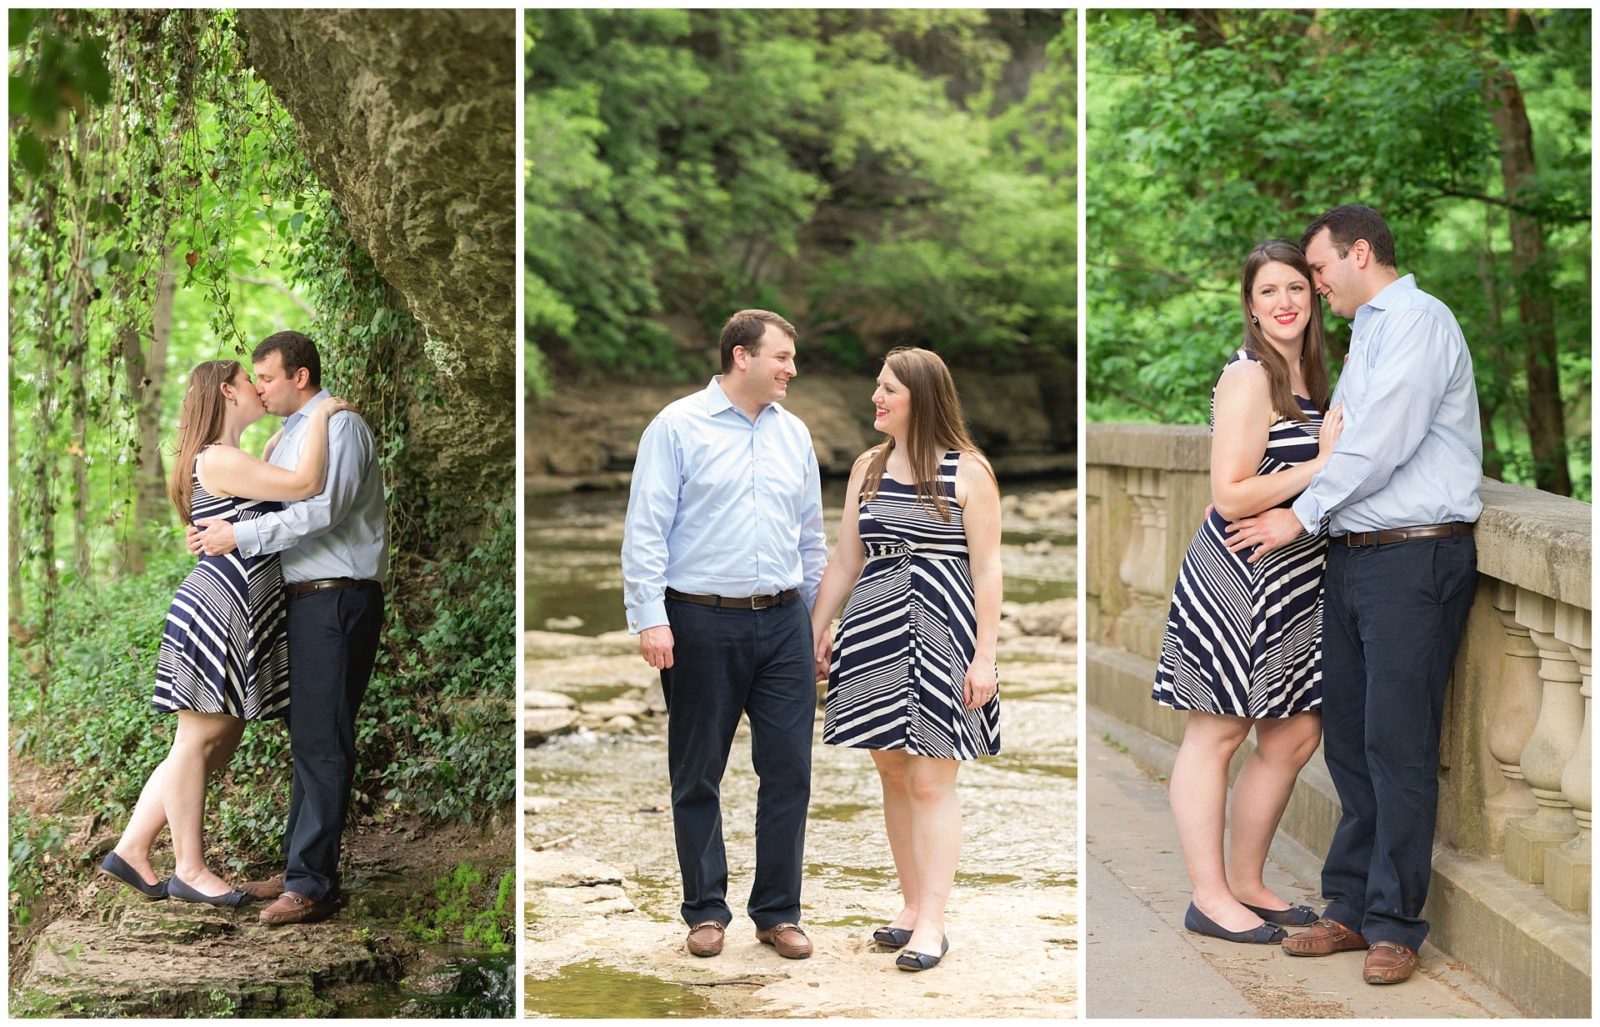 Engagement photos at Cherokee Park and Big Rock Park in Louisville, KY